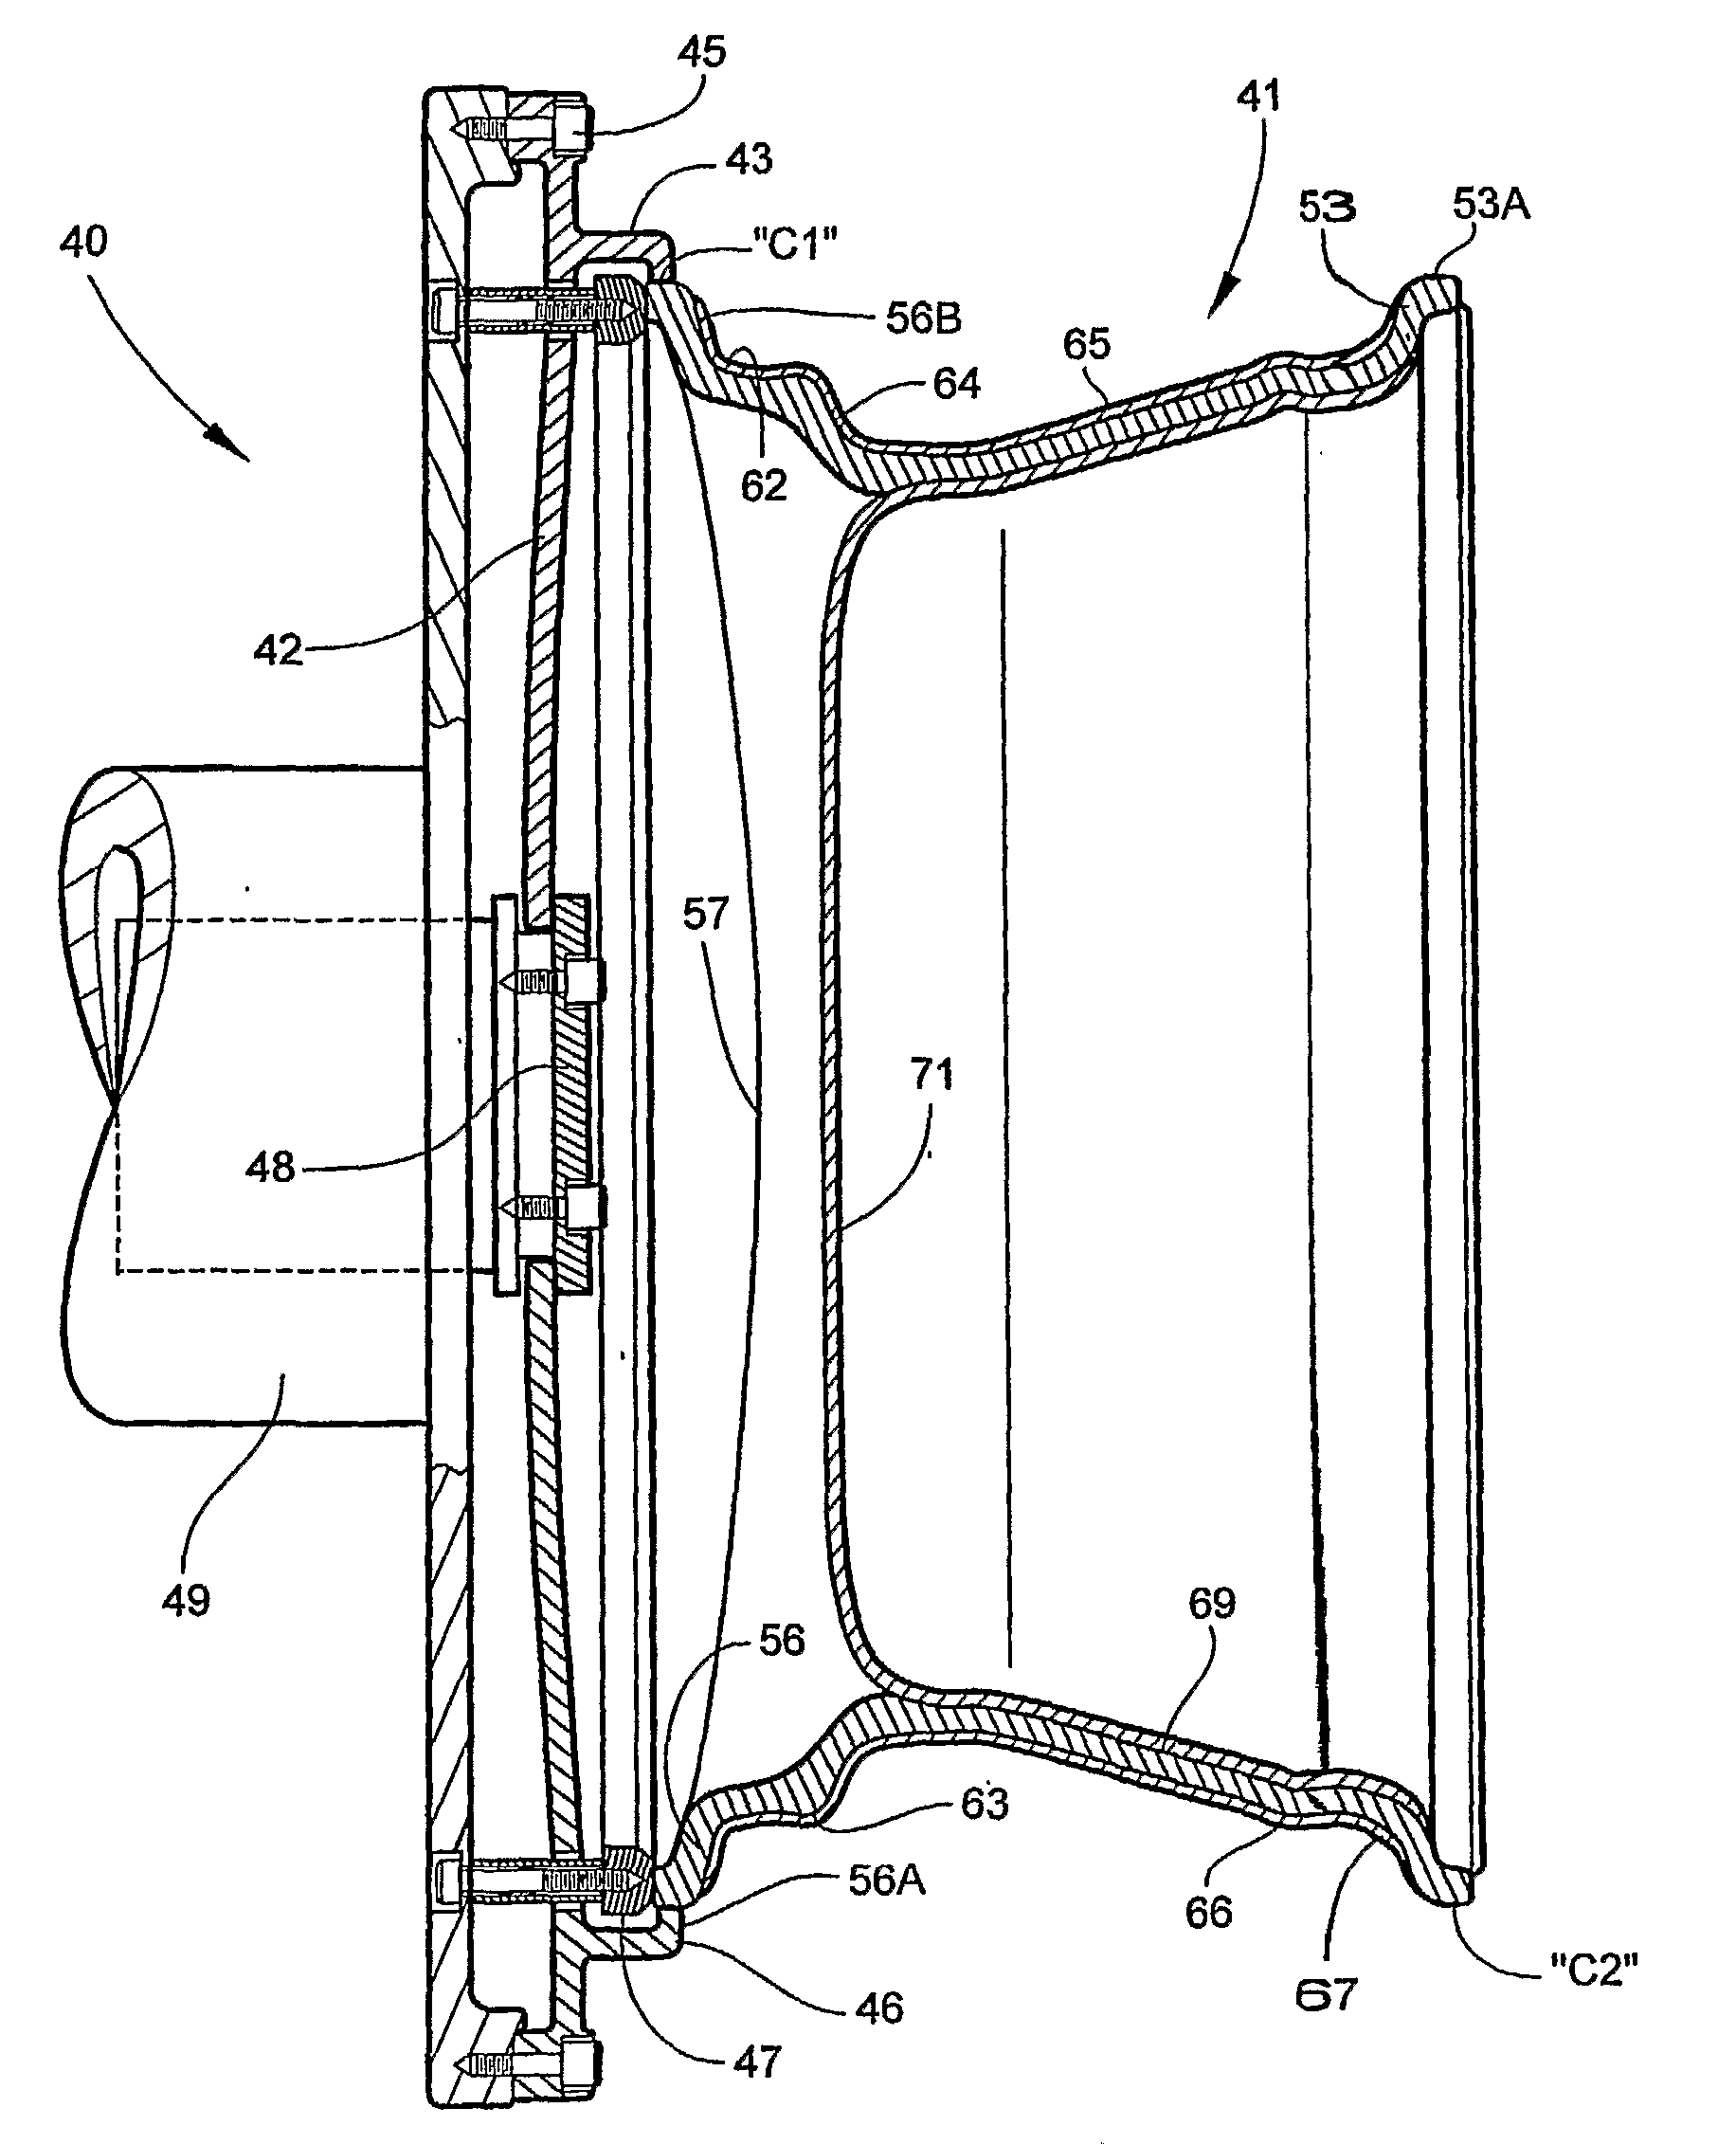 Method For Clamping And Turning A Vehicle Wheel Shape